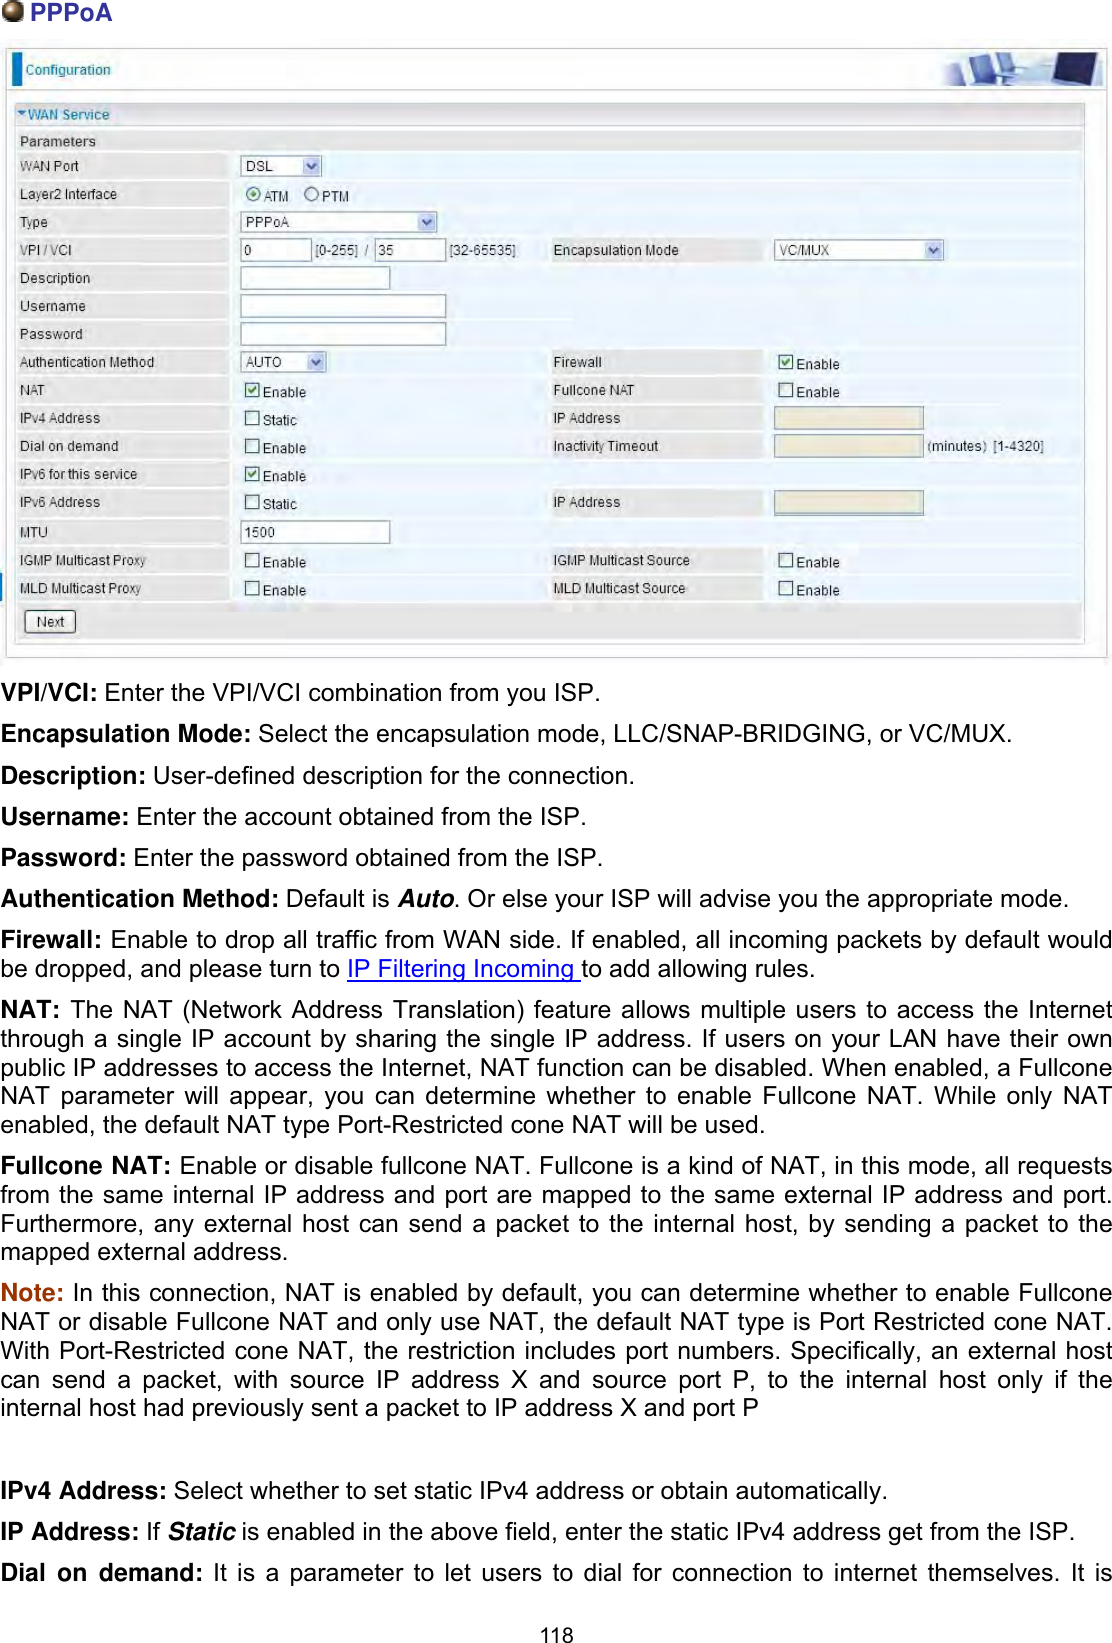 118 PPPoAVPI/VCI: Enter the VPI/VCI combination from you ISP. Encapsulation Mode: Select the encapsulation mode, LLC/SNAP-BRIDGING, or VC/MUX.Description: User-defined description for the connection.Username: Enter the account obtained from the ISP. Password: Enter the password obtained from the ISP.Authentication Method: Default is Auto. Or else your ISP will advise you the appropriate mode.Firewall: Enable to drop all traffic from WAN side. If enabled, all incoming packets by default would be dropped, and please turn to IP Filtering Incoming to add allowing rules. NAT: The NAT (Network Address Translation) feature allows multiple users to access the Internet through a single IP account by sharing the single IP address. If users on your LAN have their own public IP addresses to access the Internet, NAT function can be disabled. When enabled, a Fullcone NAT parameter will appear, you can determine whether to enable Fullcone NAT. While only NAT enabled, the default NAT type Port-Restricted cone NAT will be used.  Fullcone NAT: Enable or disable fullcone NAT. Fullcone is a kind of NAT, in this mode, all requests from the same internal IP address and port are mapped to the same external IP address and port. Furthermore, any external host can send a packet to the internal host, by sending a packet to the mapped external address. Note: In this connection, NAT is enabled by default, you can determine whether to enable Fullcone NAT or disable Fullcone NAT and only use NAT, the default NAT type is Port Restricted cone NAT. With Port-Restricted cone NAT, the restriction includes port numbers. Specifically, an external host can send a packet, with source IP address X and source port P, to the internal host only if the internal host had previously sent a packet to IP address X and port P IPv4 Address: Select whether to set static IPv4 address or obtain automatically. IP Address: If Static is enabled in the above field, enter the static IPv4 address get from the ISP.Dial on demand: It is a parameter to let users to dial for connection to internet themselves. It is 